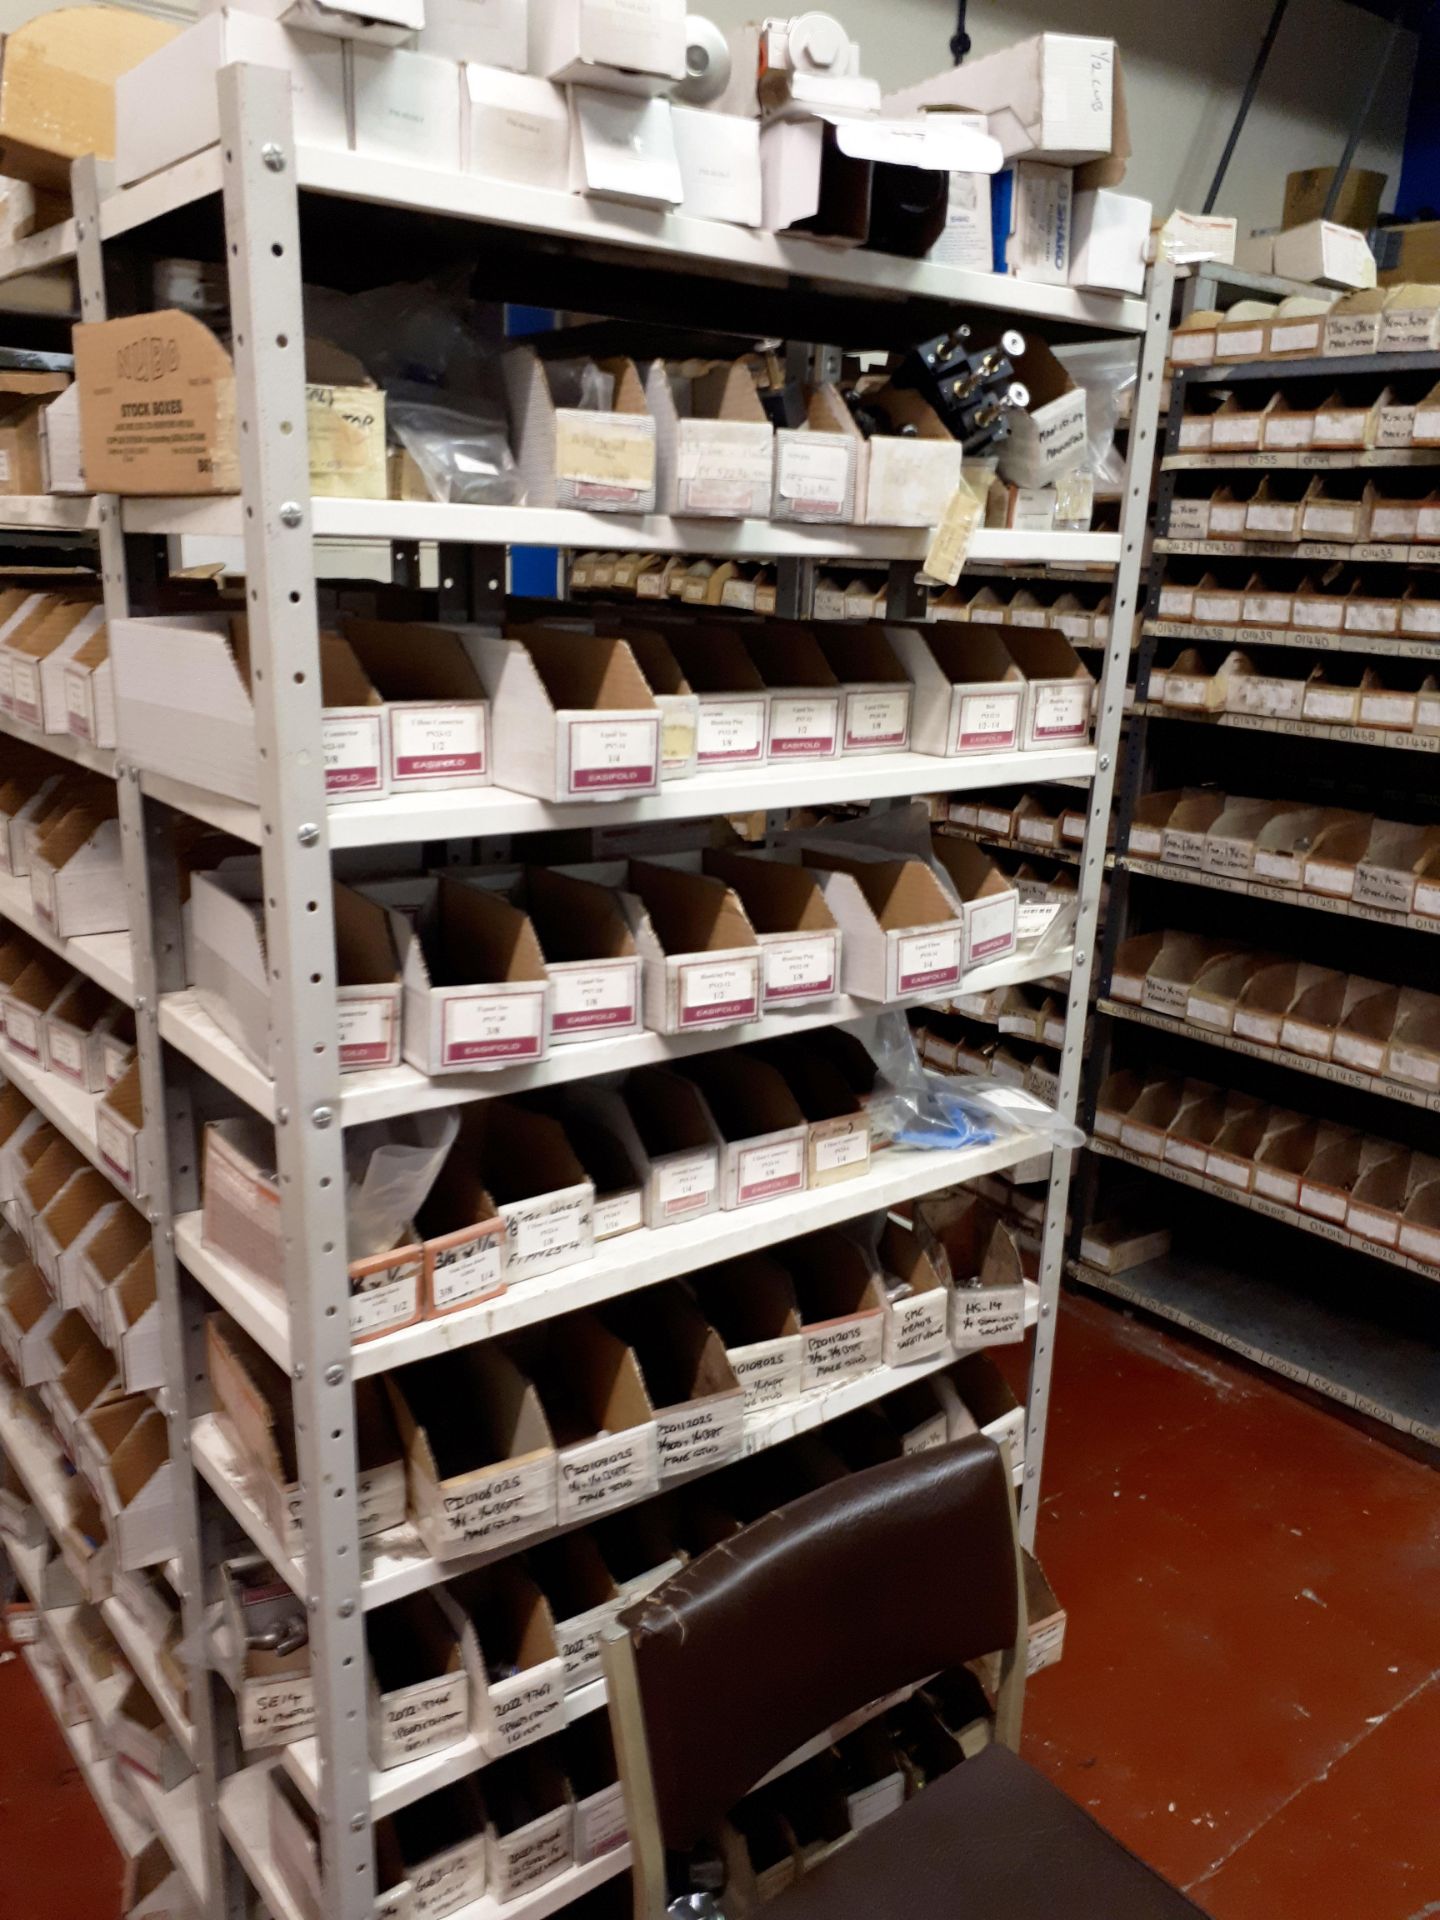 7 Bays of Steel Shelving & Contents of Various Low Pressure Fittings including Ball Valves, - Image 2 of 10